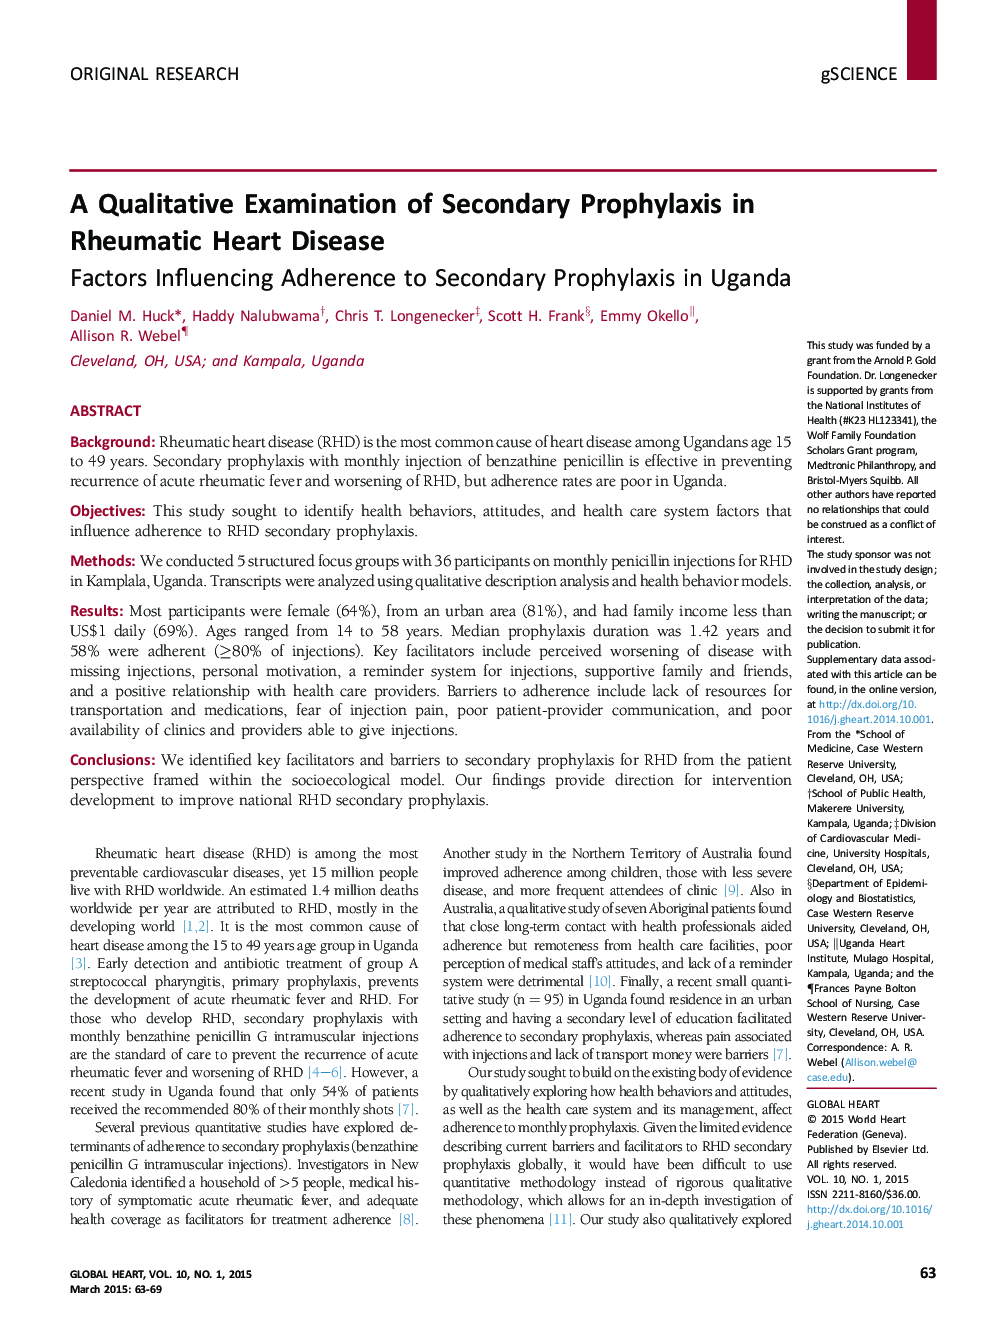 A Qualitative Examination of Secondary Prophylaxis in Rheumatic Heart Disease